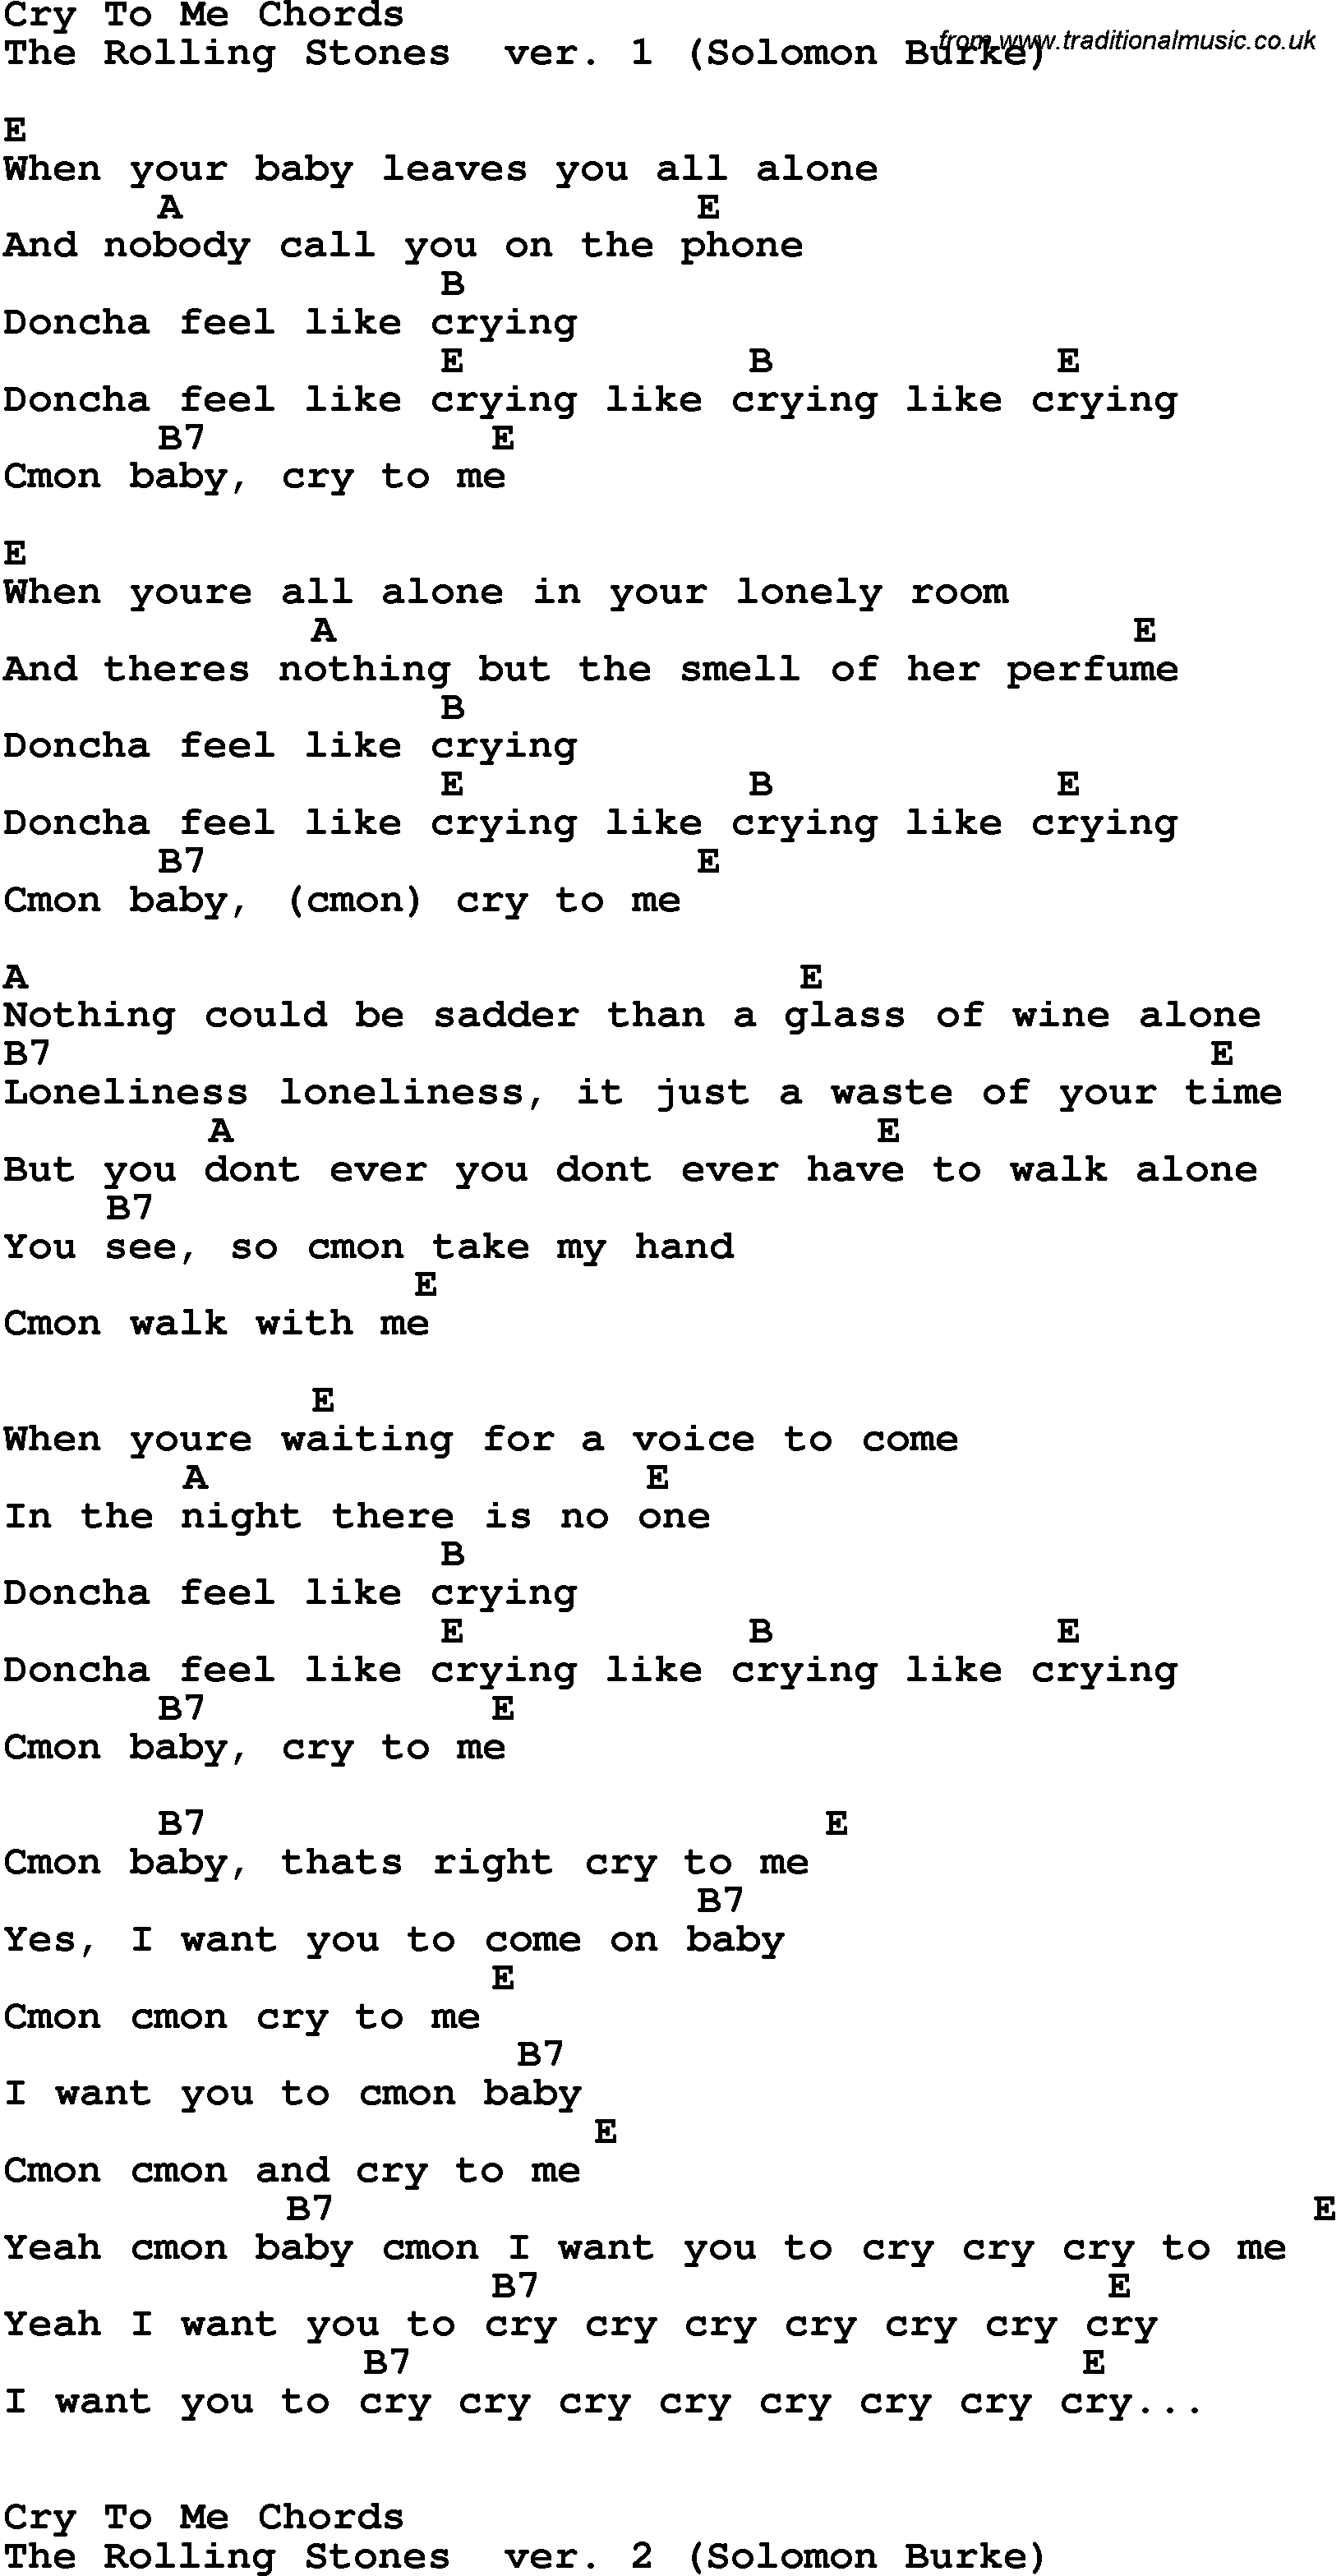 Song Lyrics with guitar chords for Cry To Me